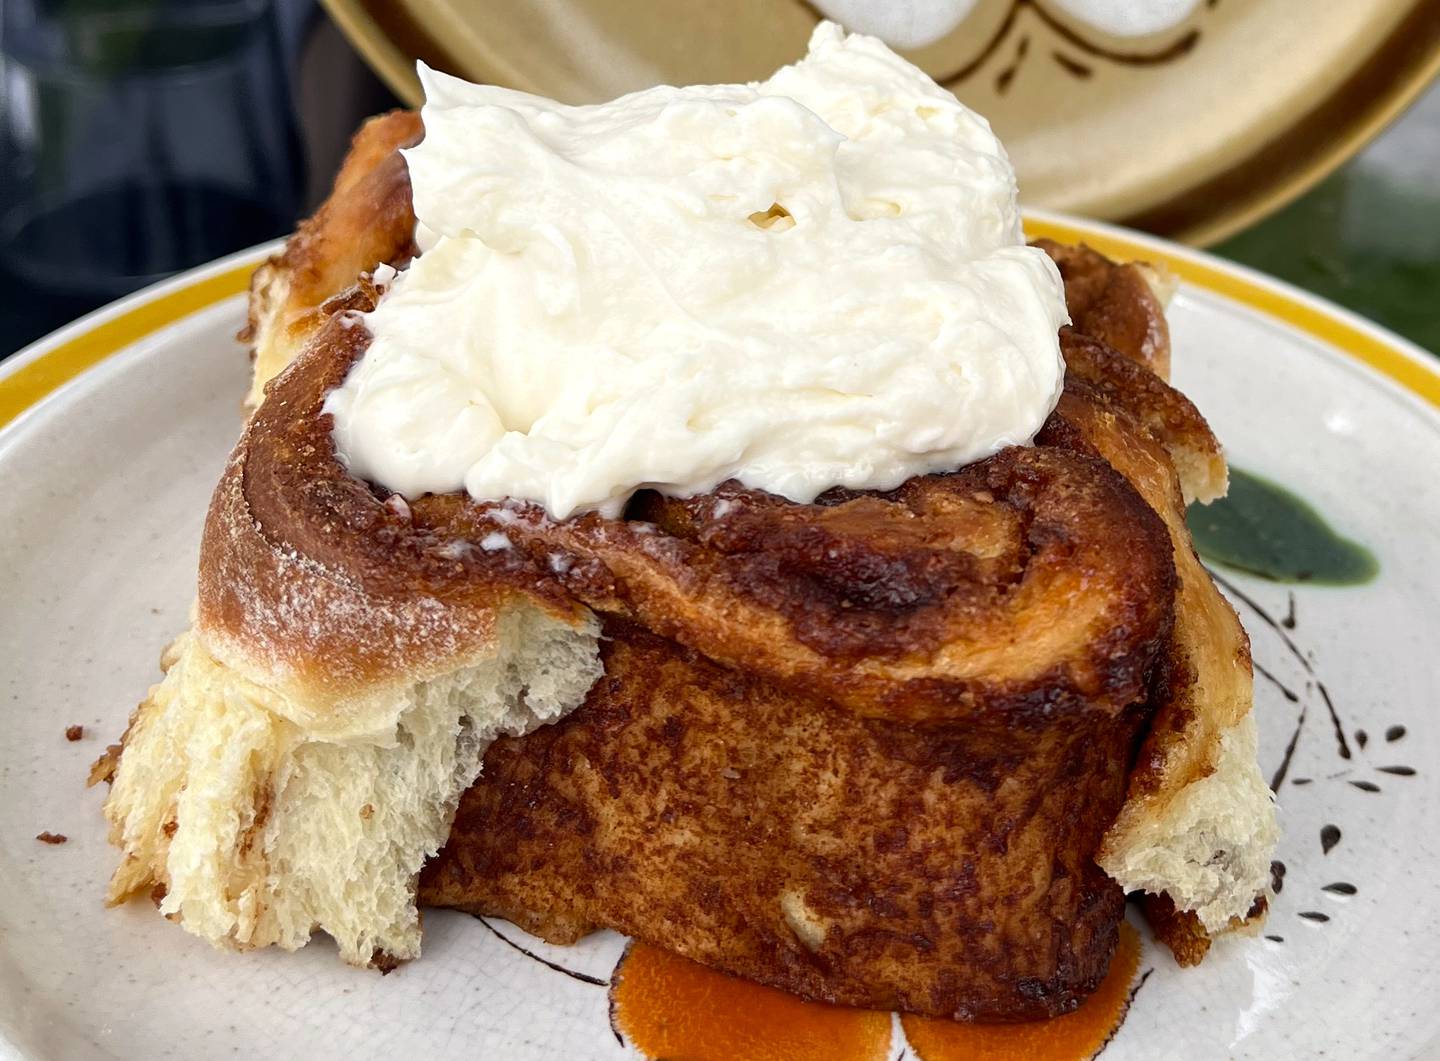 Launch Kitchen brings cinnamon rolls to the table as an appetizer.